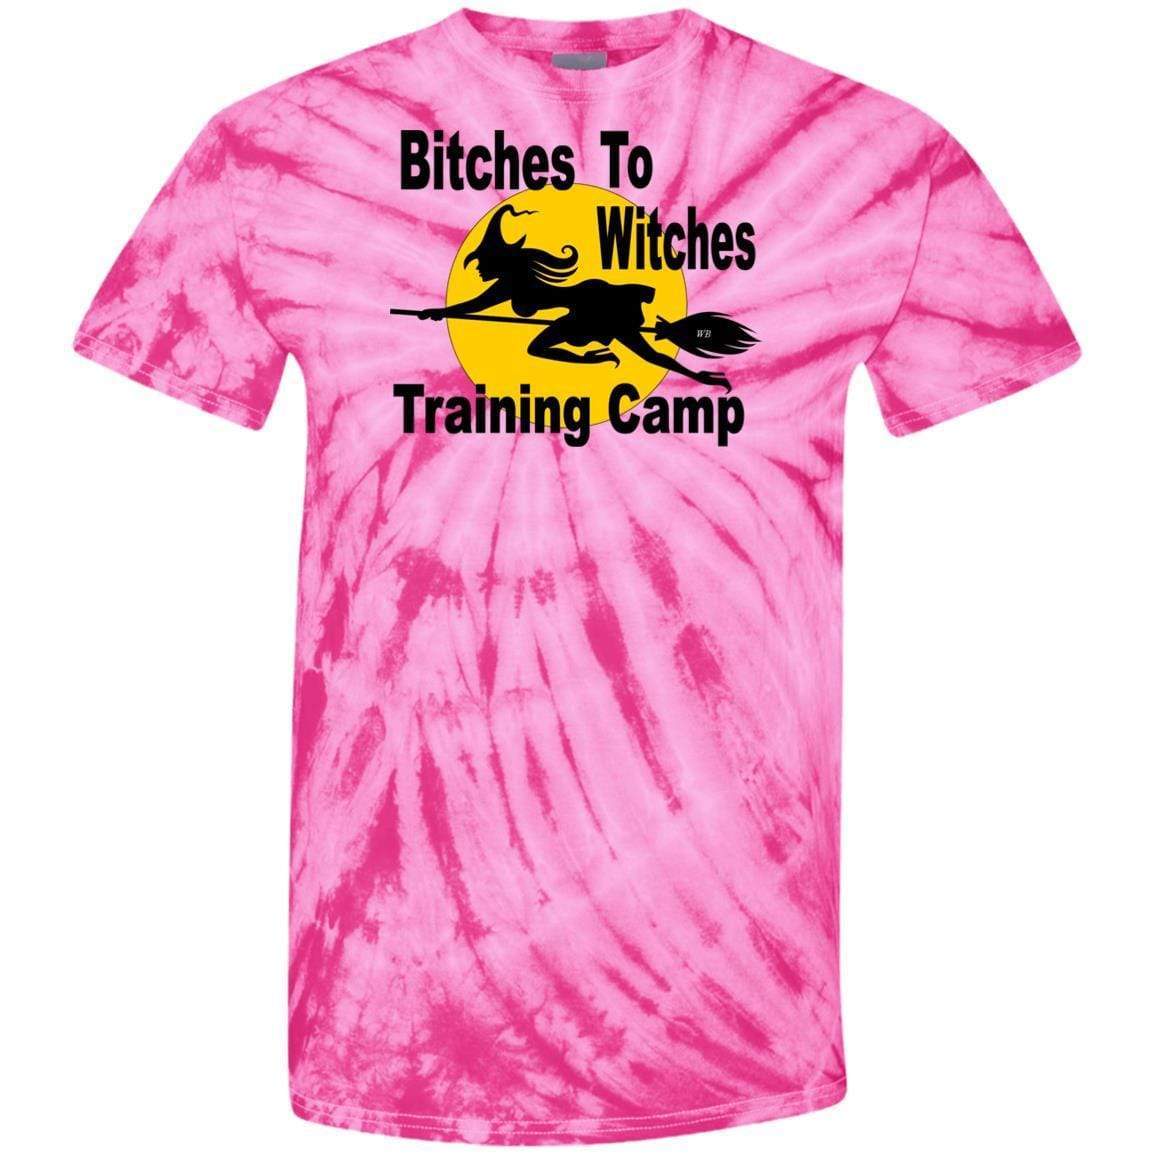 T-Shirts SpiderPink / S WineyBitches.Co "Bitches To Witches Training Camp" - 100% Cotton Tie Dye T-Shirt WineyBitchesCo